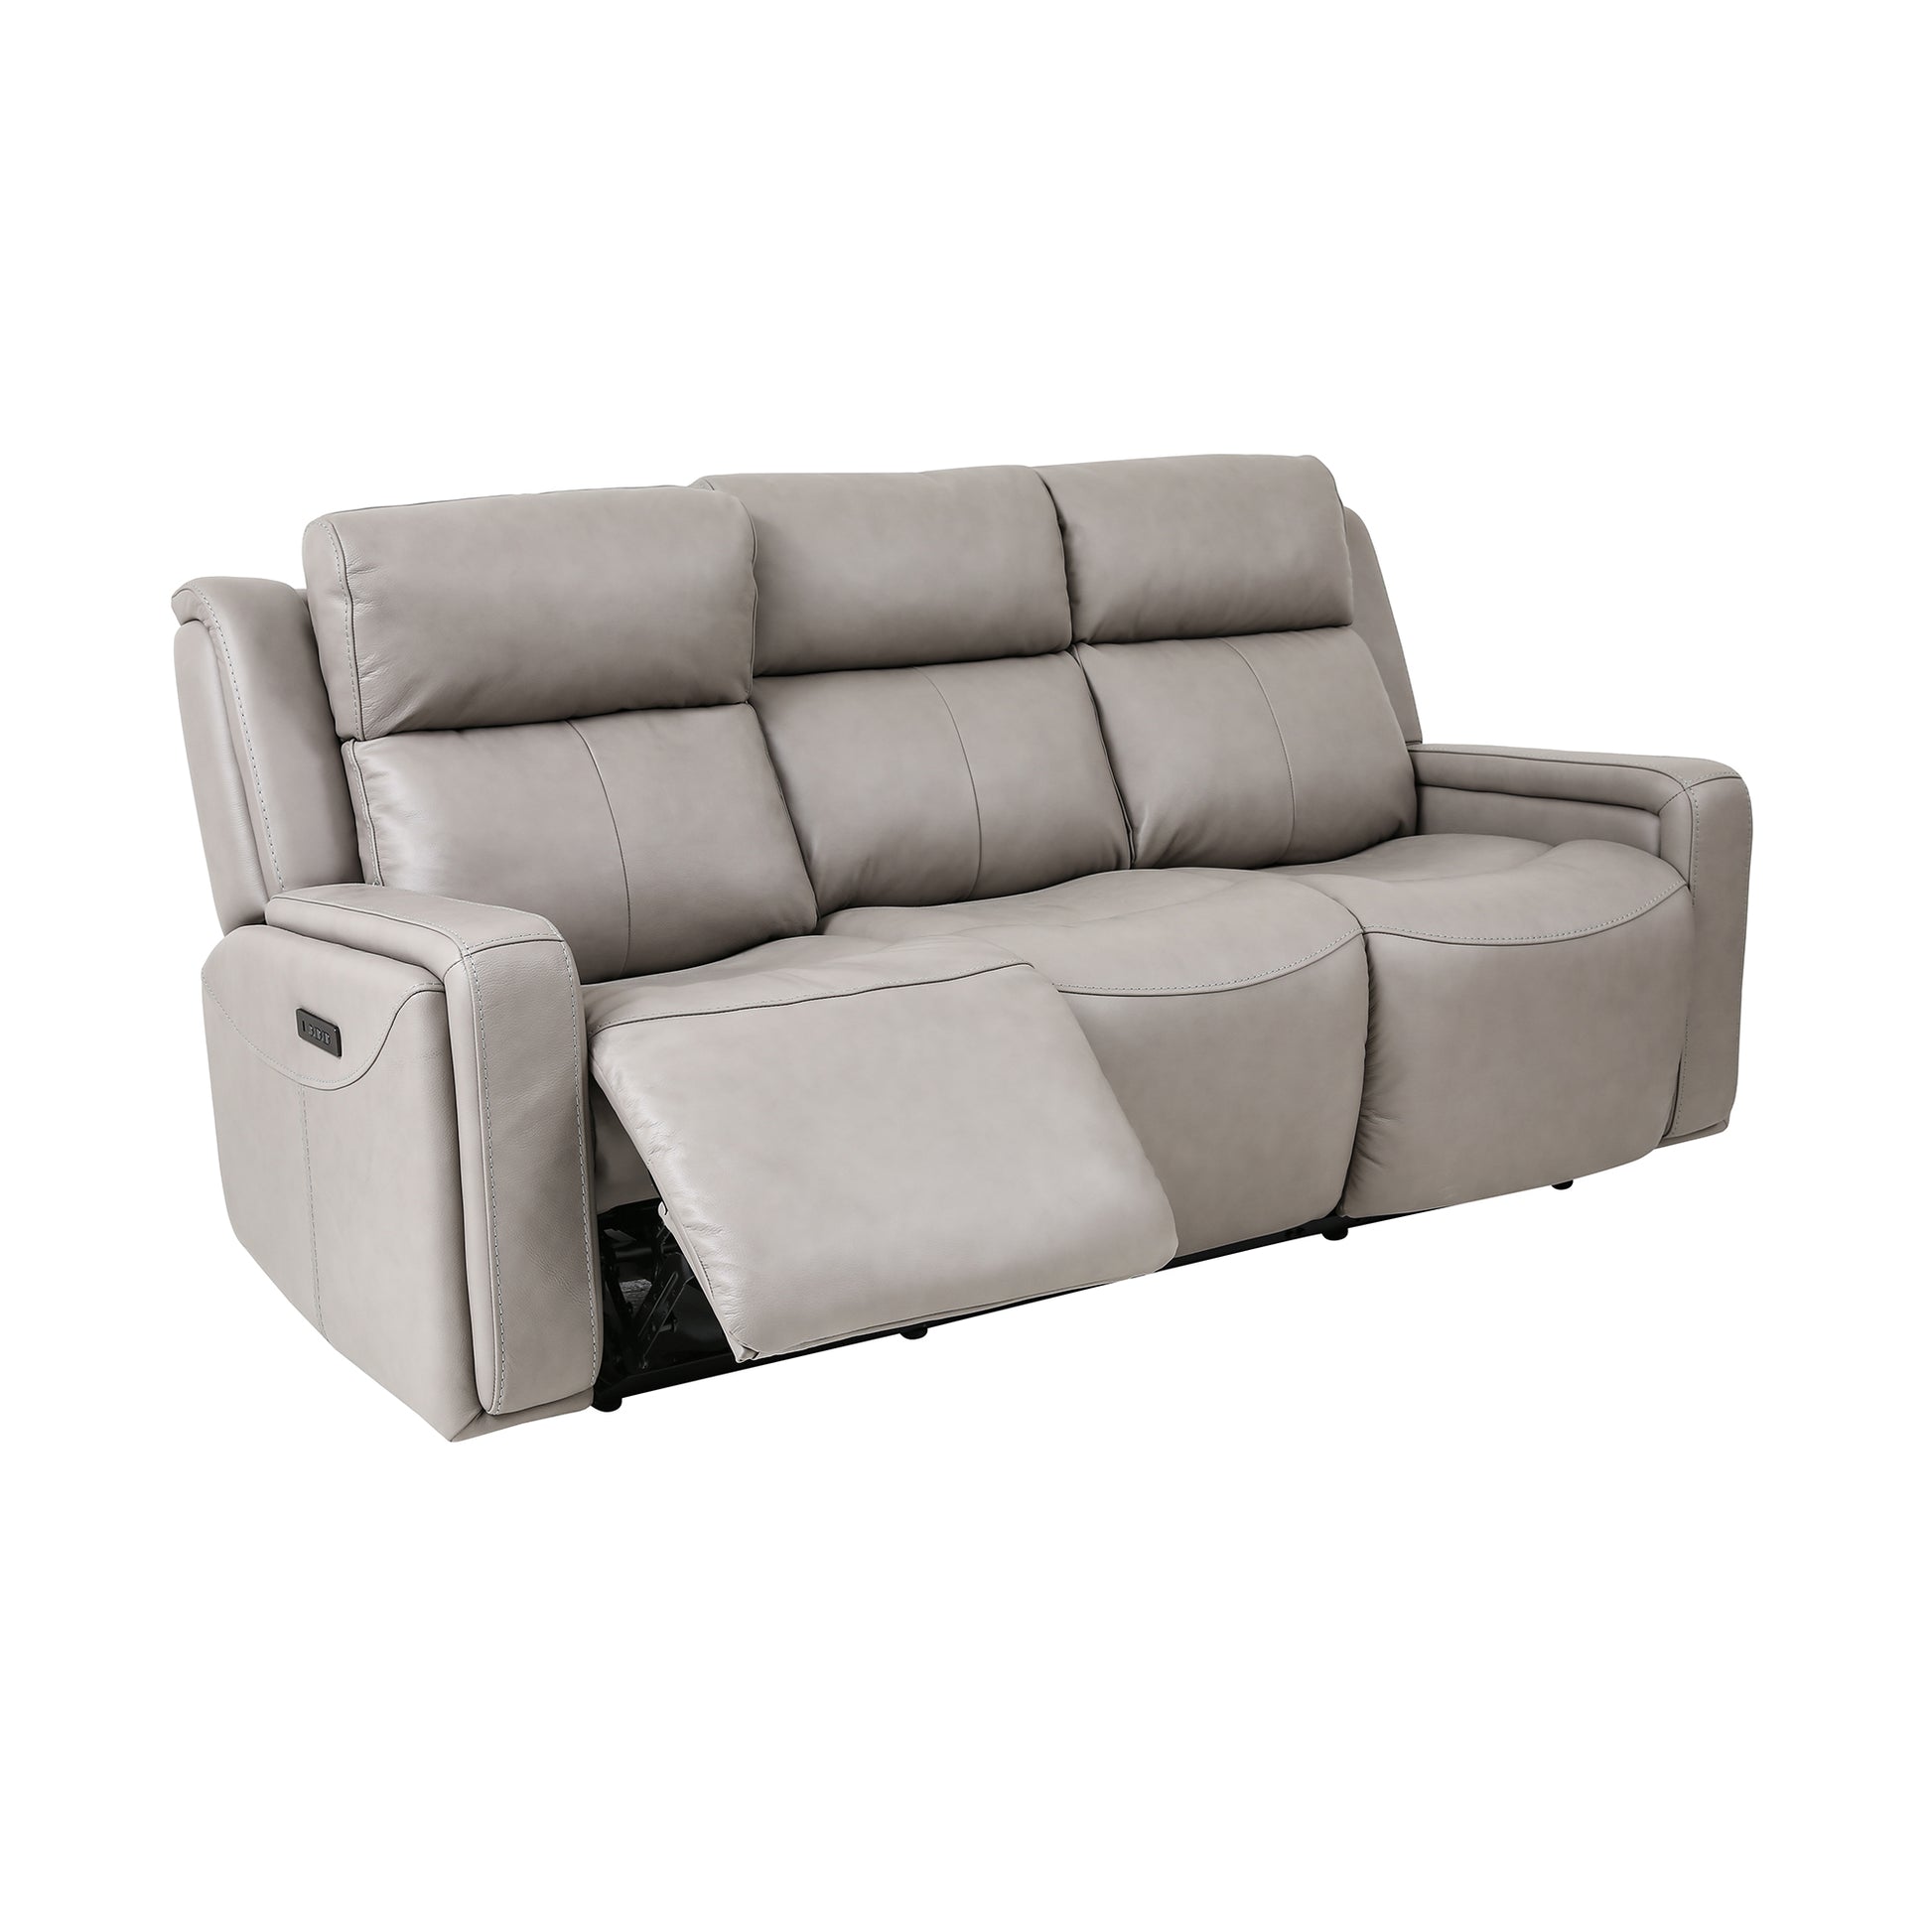 Armen Living Claude Dual Power Headrest and Lumbar Support Reclining Sofa in Light Grey Genuine Leather